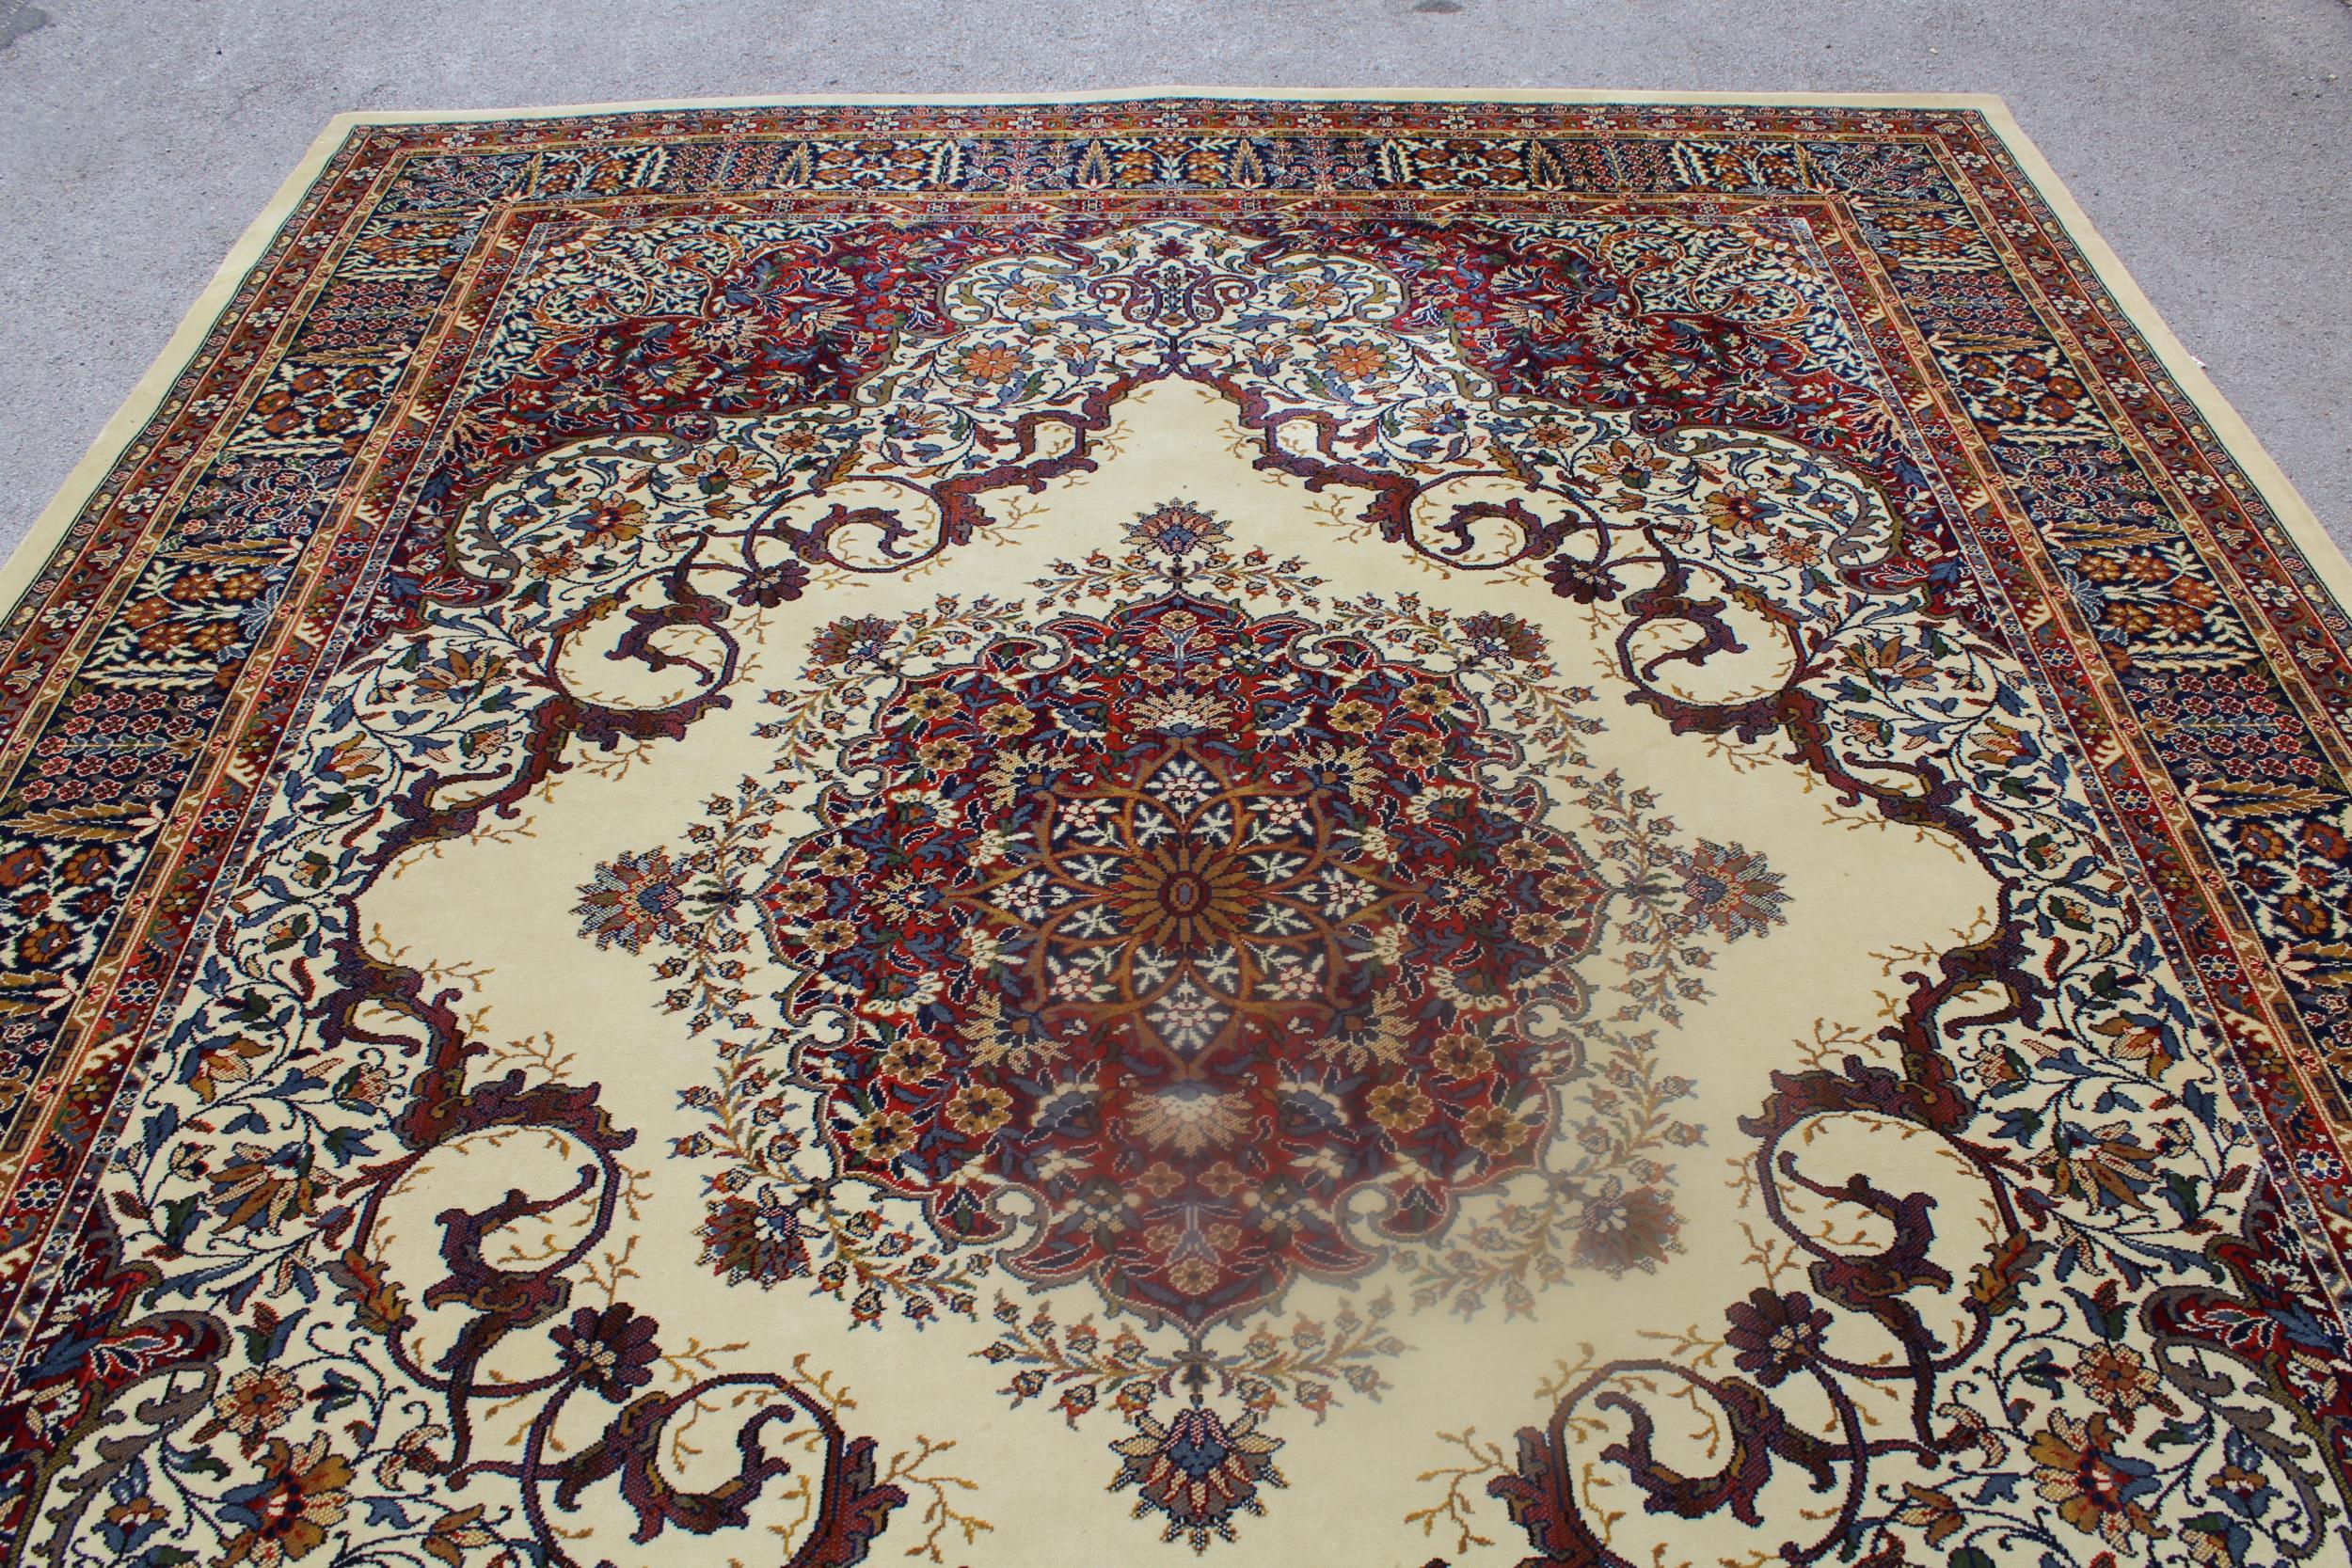 Machine woven Persian design carpet on beige ground, 144ins x 108ins - Image 3 of 4